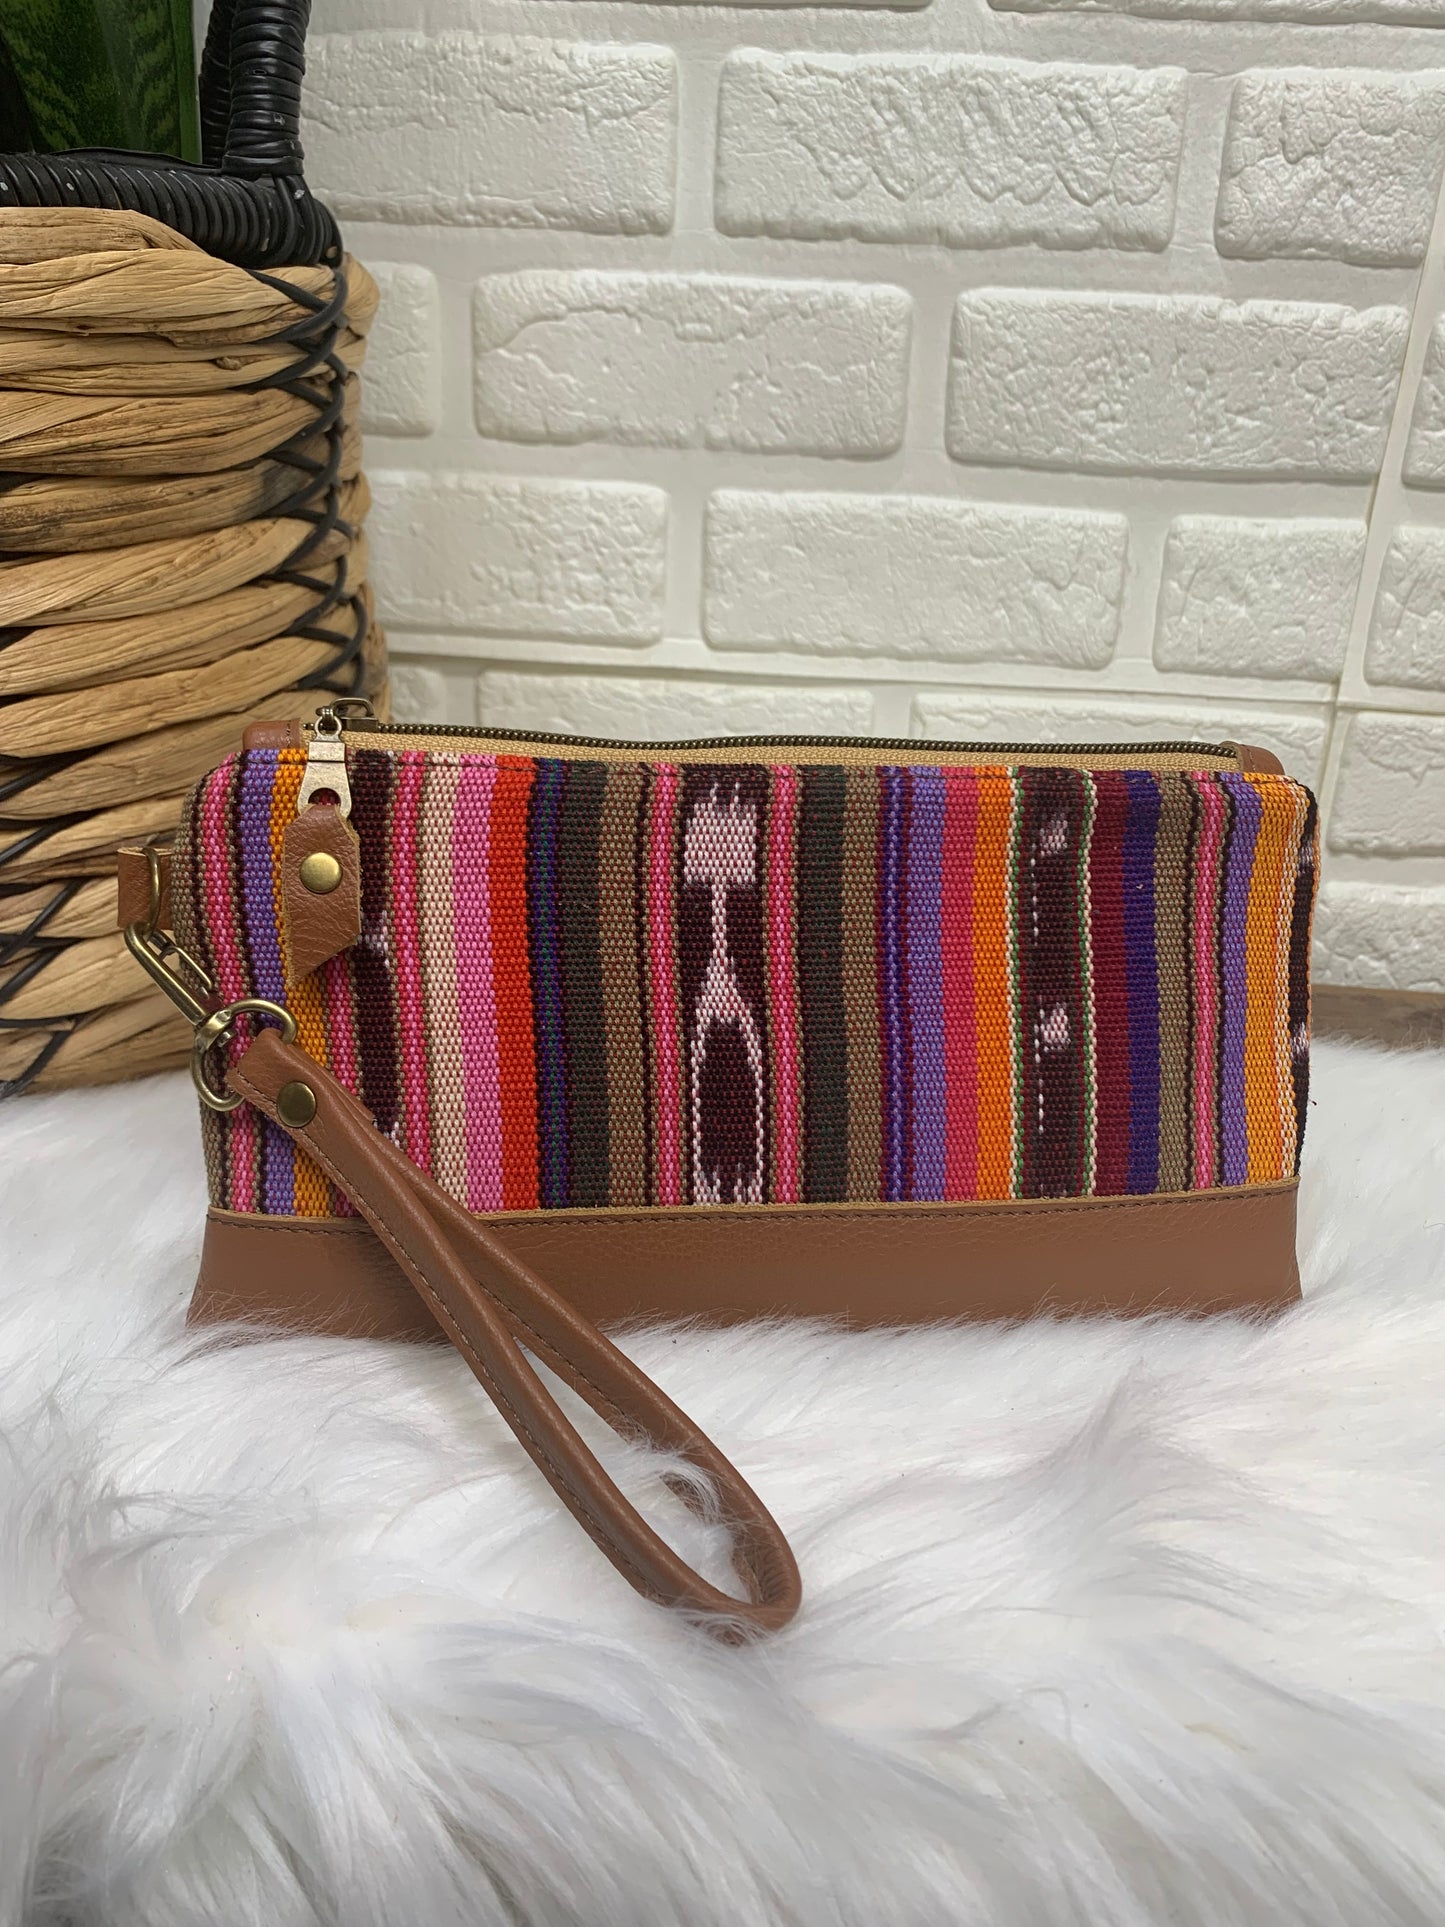 Guatemalan woven and cognac Leather clutch wristlet